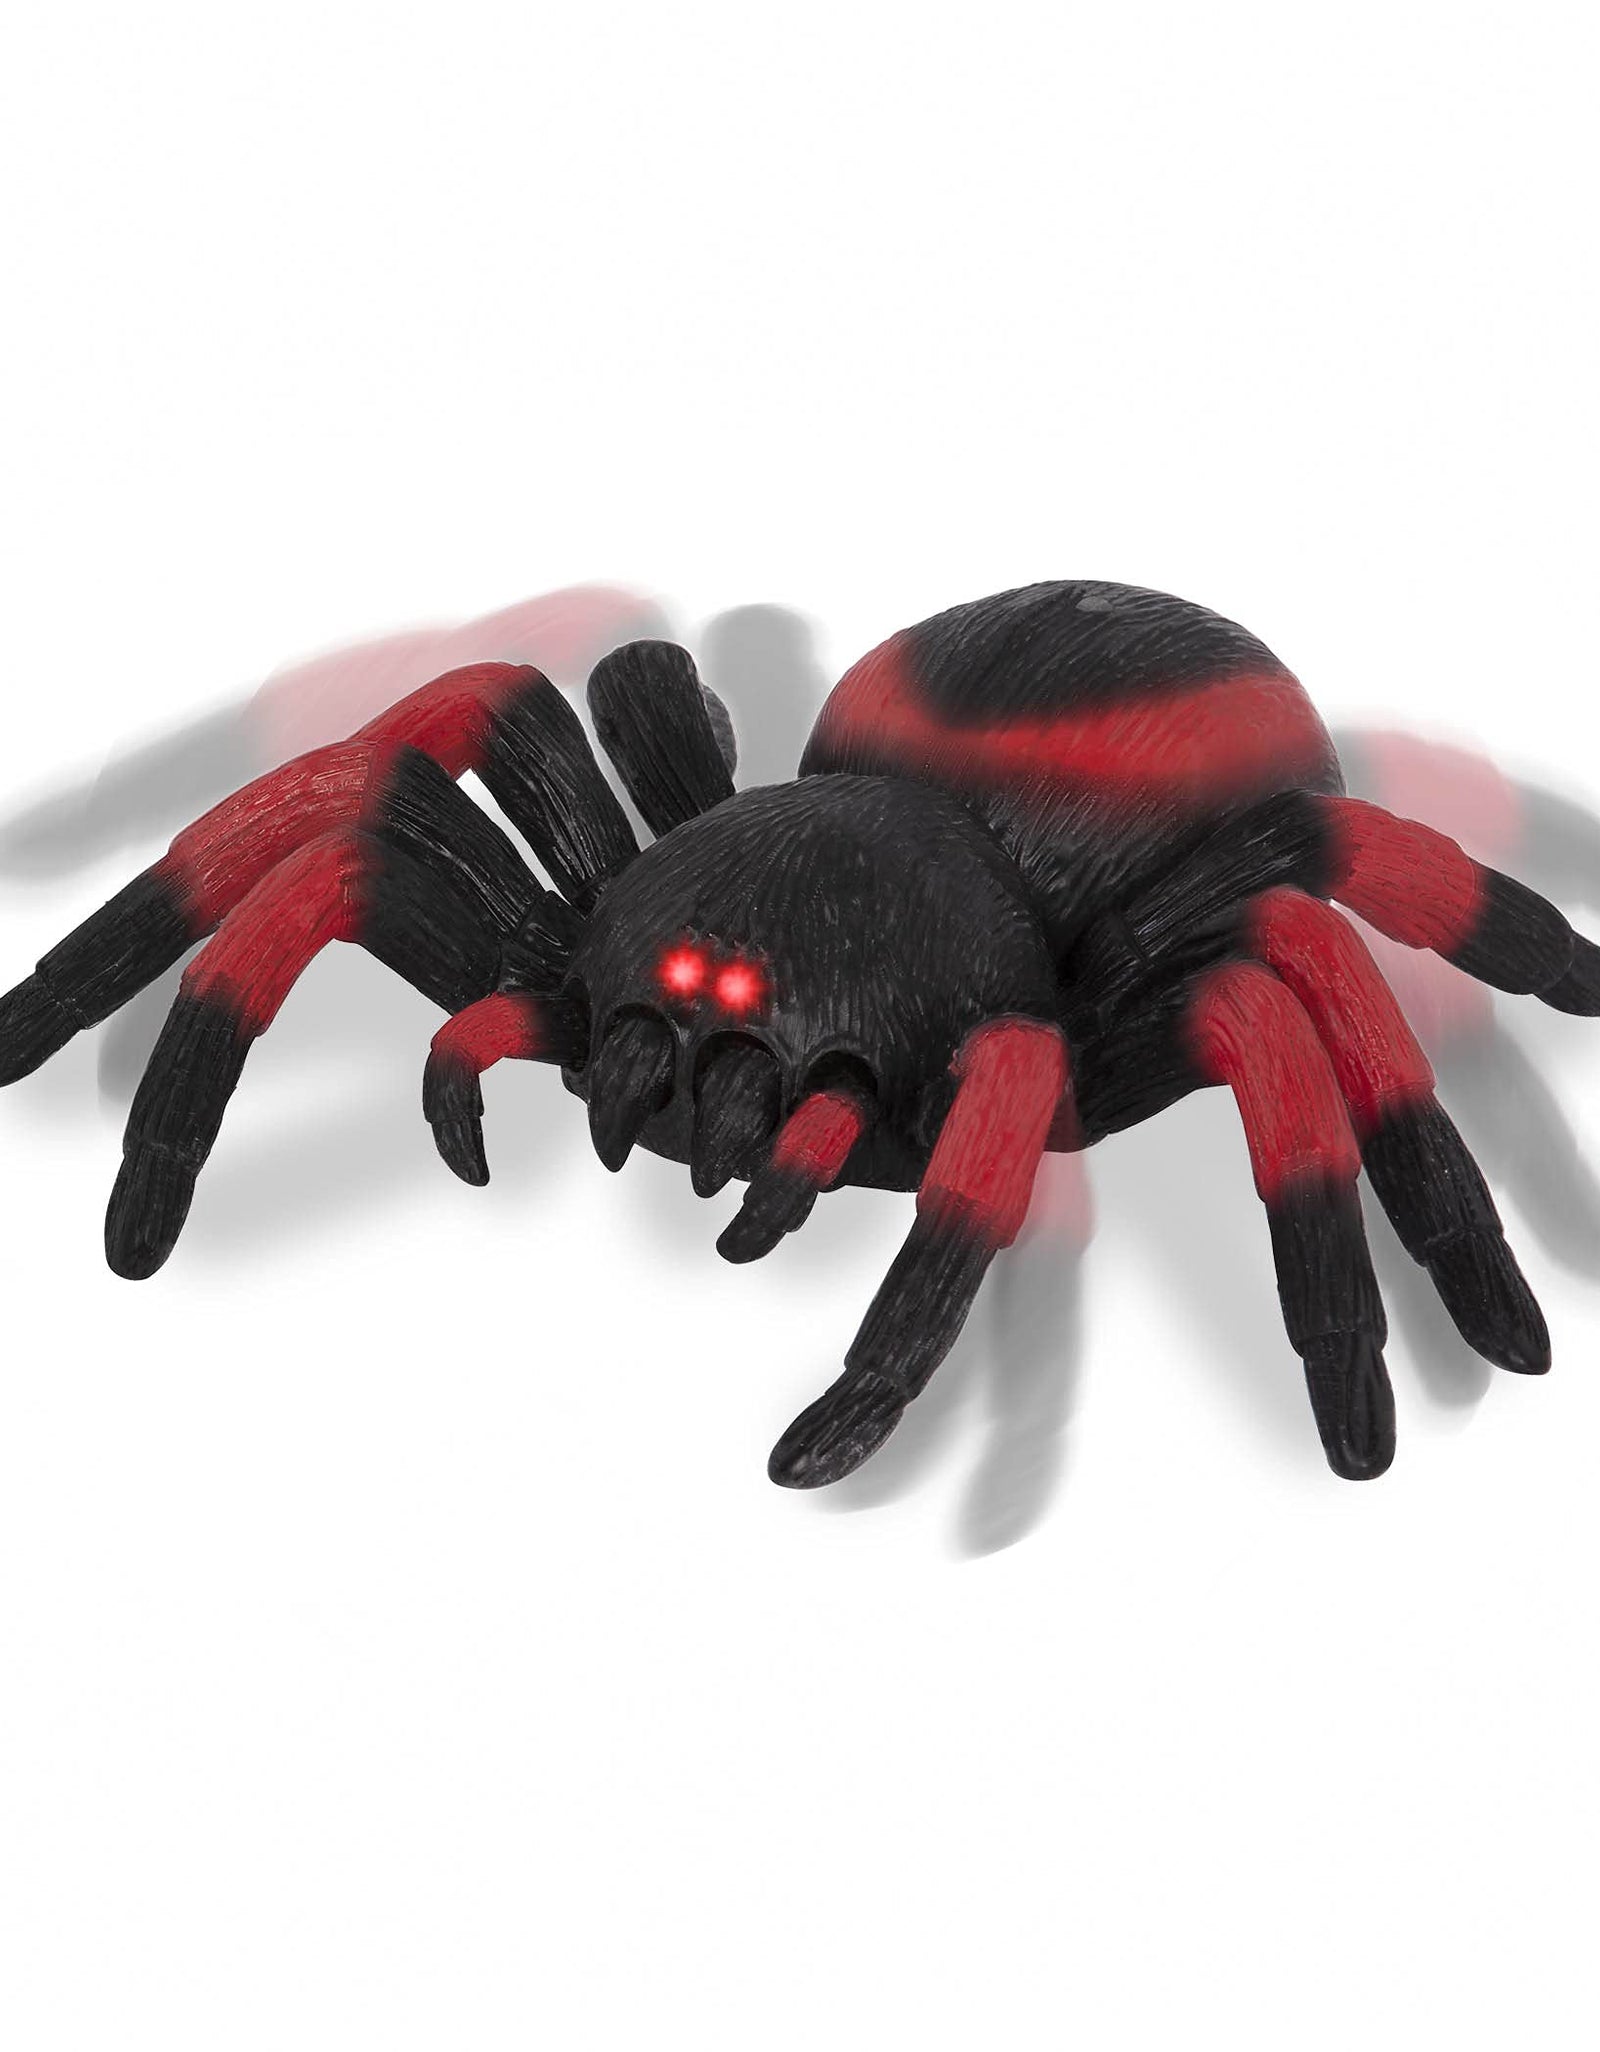 Terra by Battat - RC Spider: Tarantula - Red Infrared Remote Control Spider with Creepy Led Eyes for Kids Aged 6+, Multi